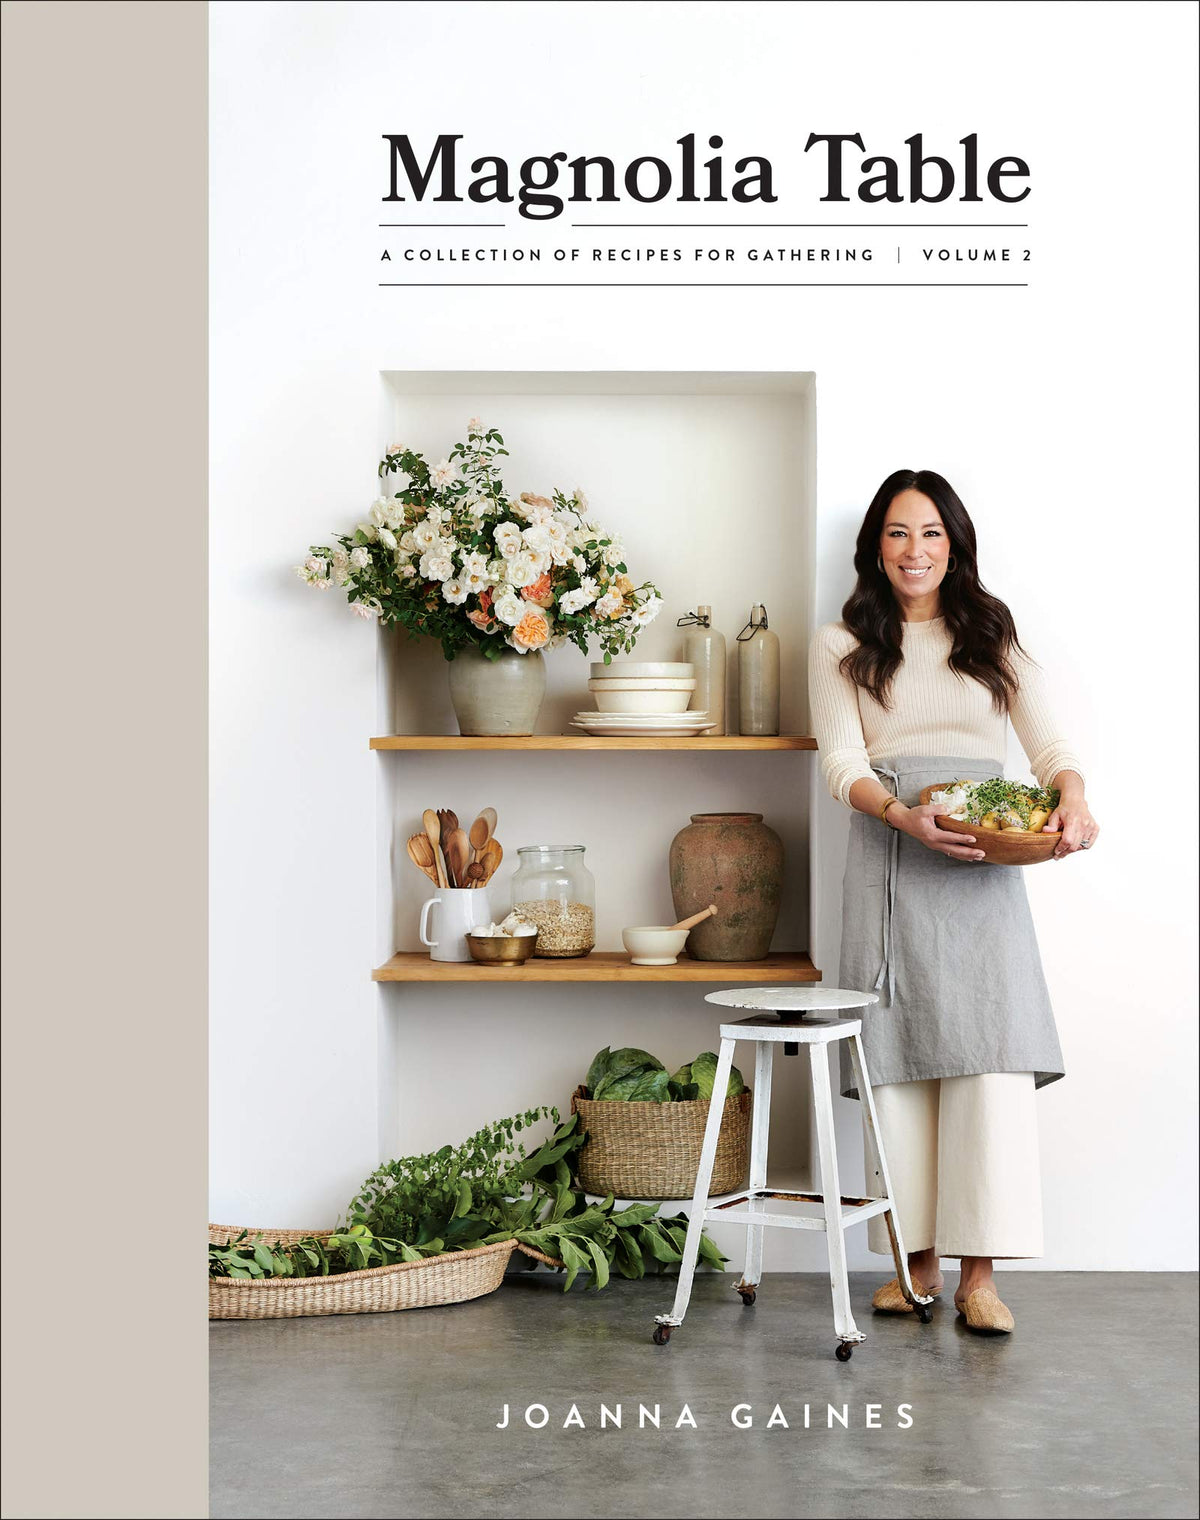 Magnolia Table, Volume 2: A Collection of Recipes for Gathering | Joanna Gaines